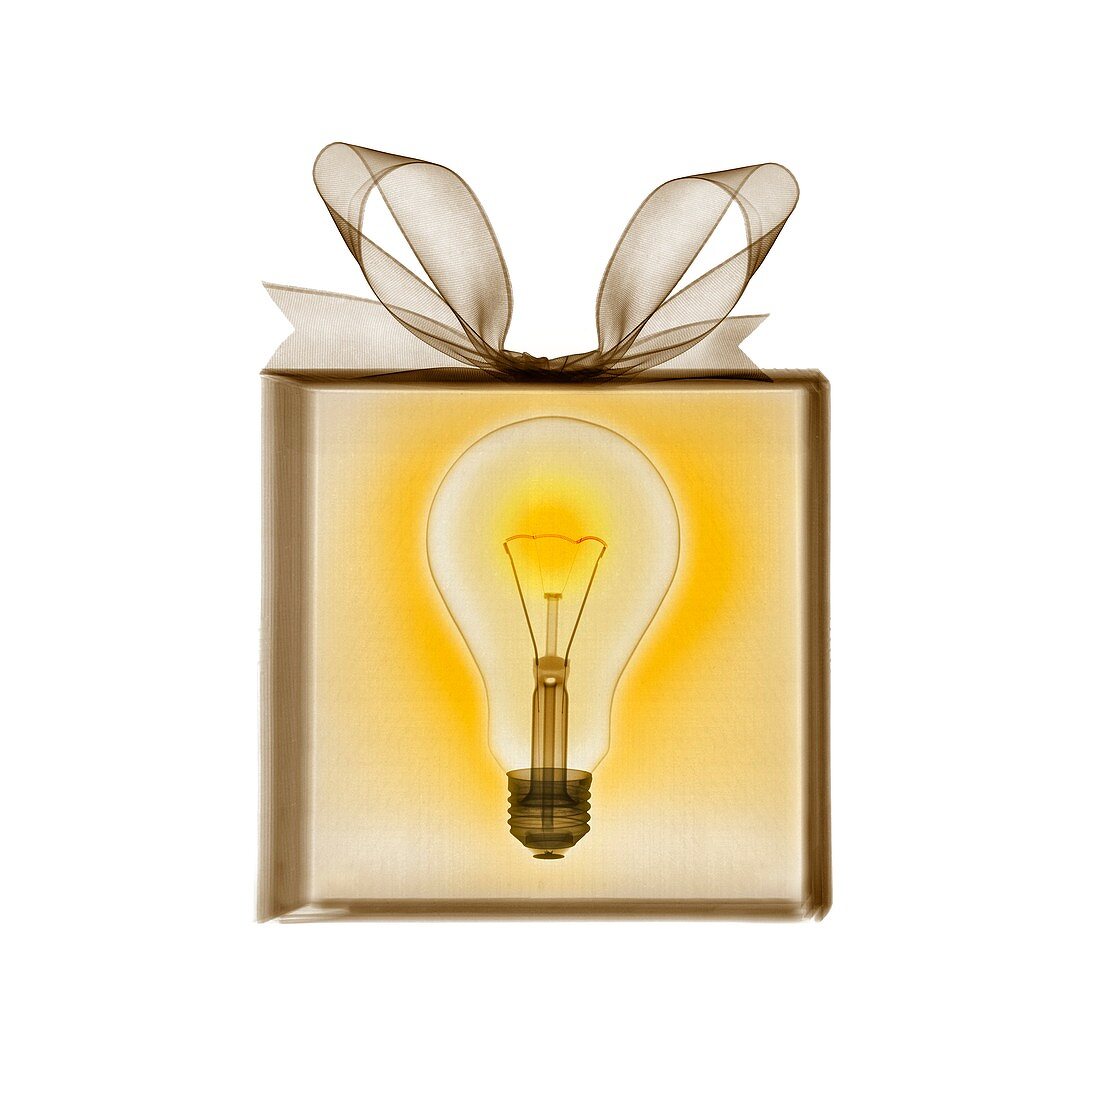 Gift wrapped present containing glowing light bulb, X-ray